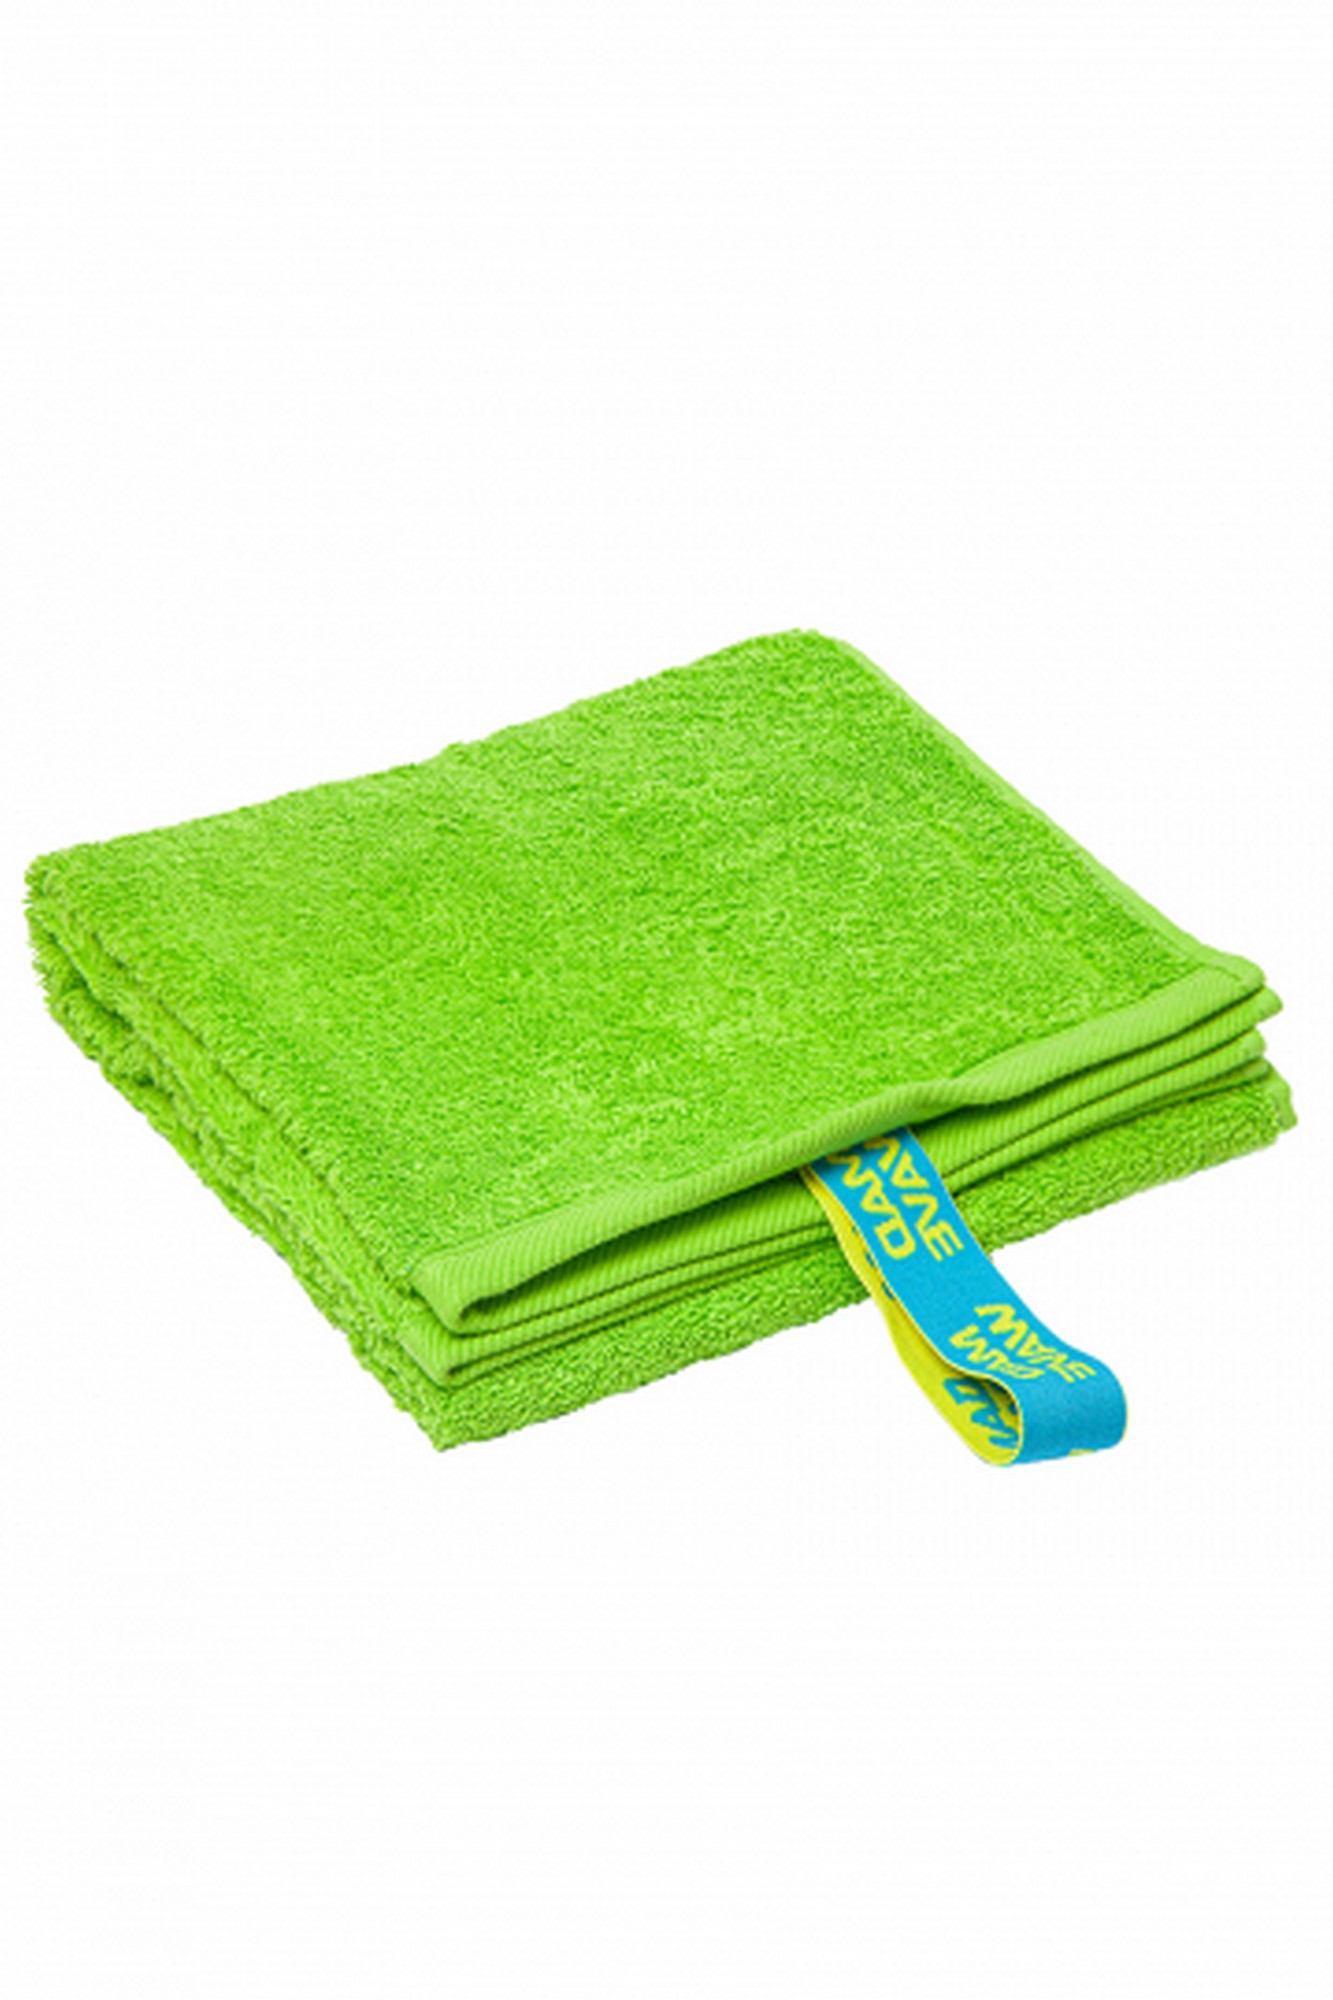  Mad Wave Cotton Sort Terry Towel M0762 01 1 10W 